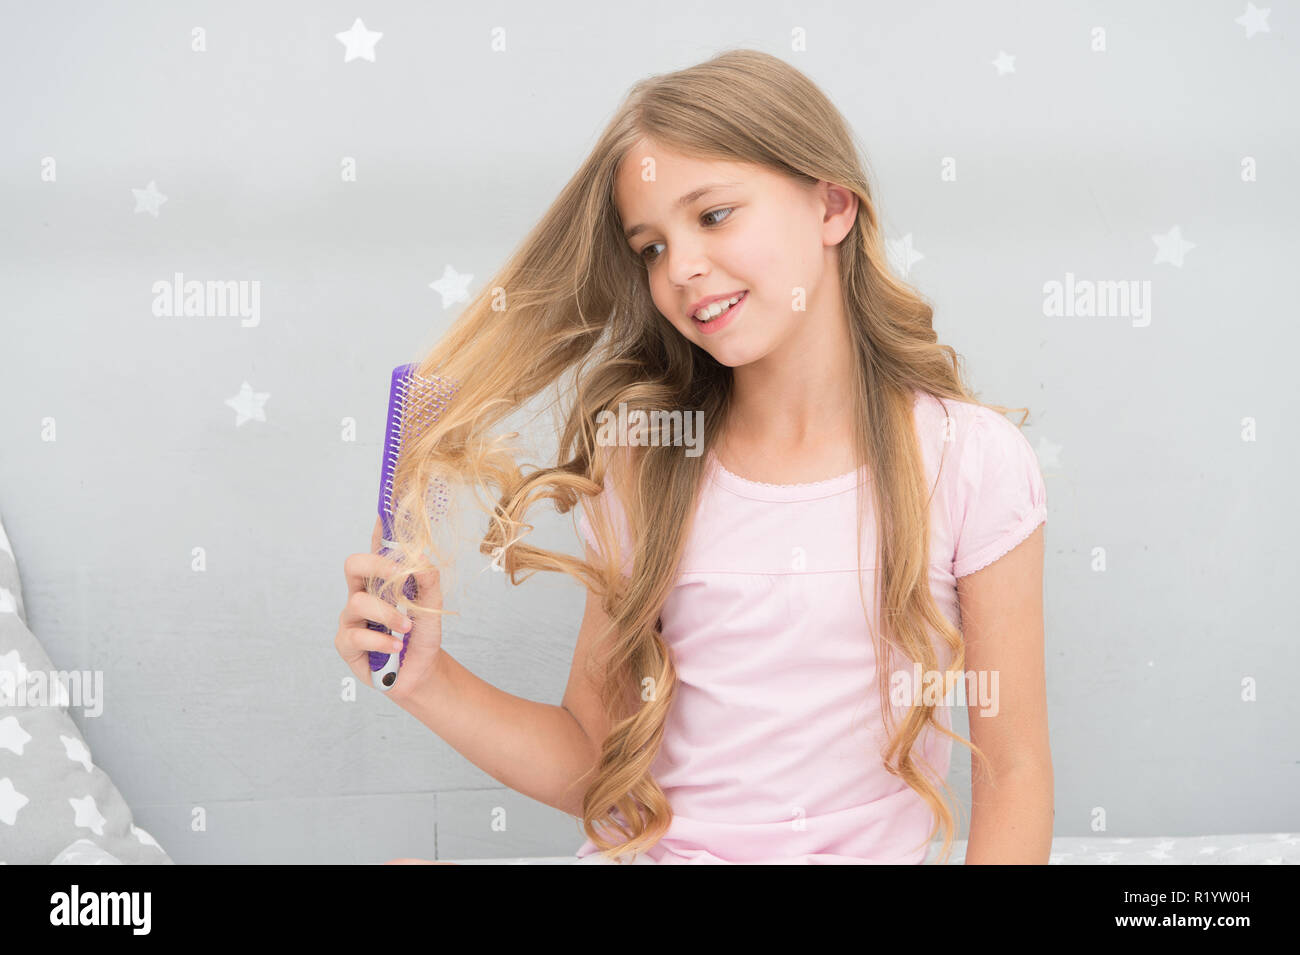 Child curly hairstyle hold hairbrush or comb. Apply oil before combing hair.  Healthy hair. Conditioner or mask organic oil comb hair. Beauty salon tips.  Girl long curly hair grey interior background Stock